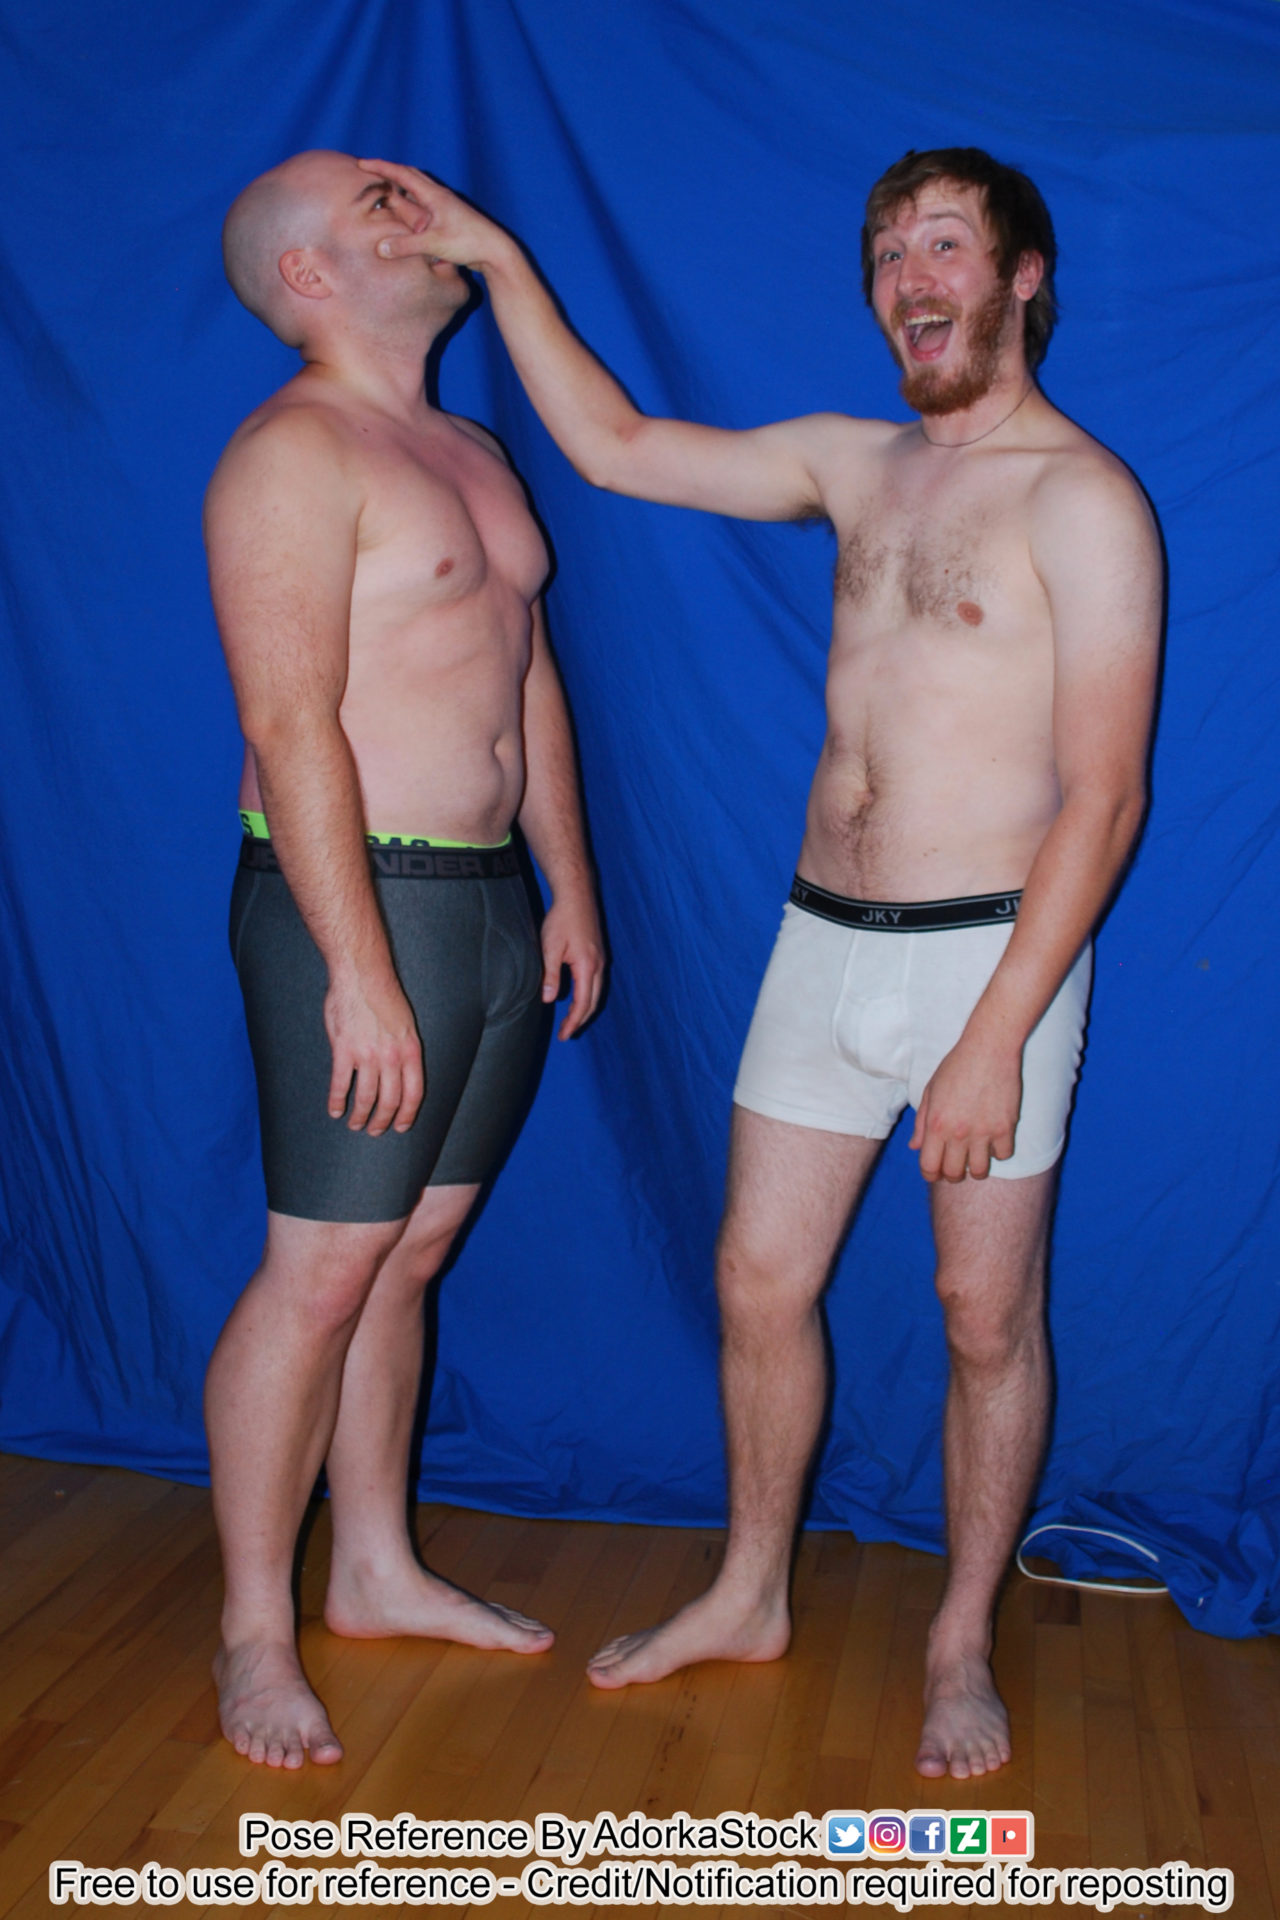 Two white male models one standing with arms limp by his side, face turned up while the other is grabbing the first's face with his hand and looking at the camera and smiling ridiculously.